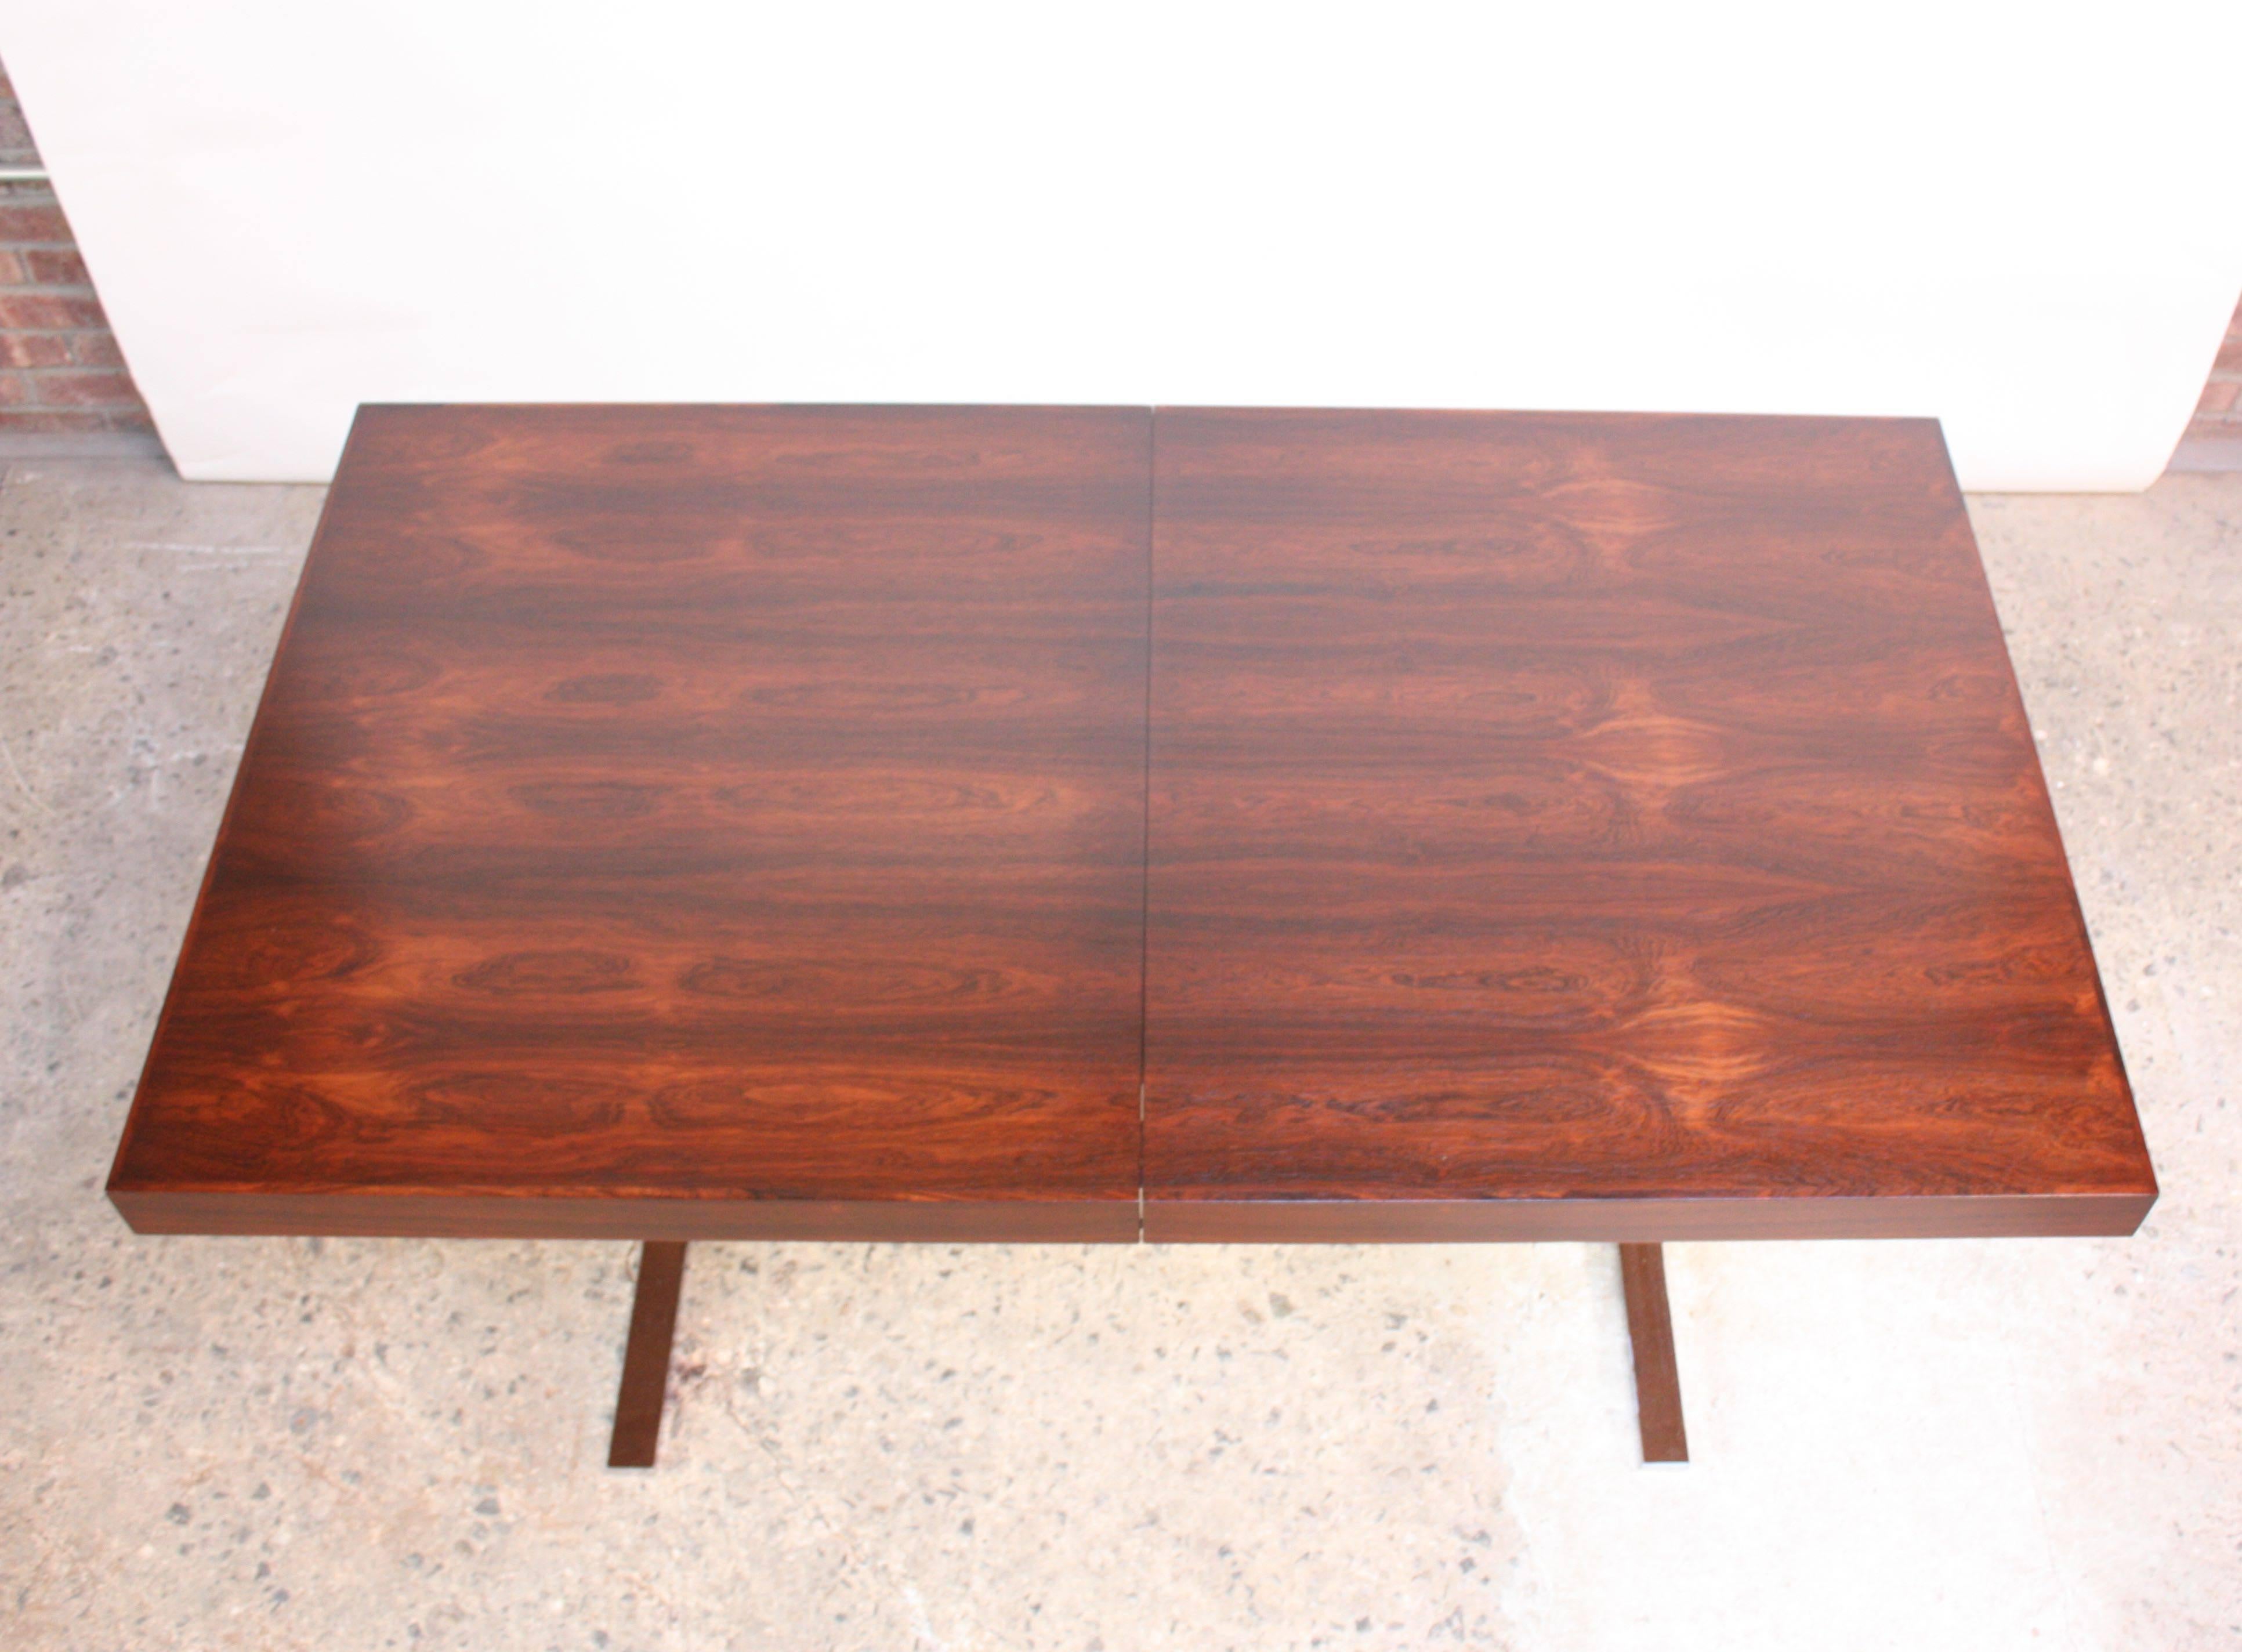 Poul Nørreklit designed this low table for Georg Petersens in the 1960s. Given its uniquely low height (27